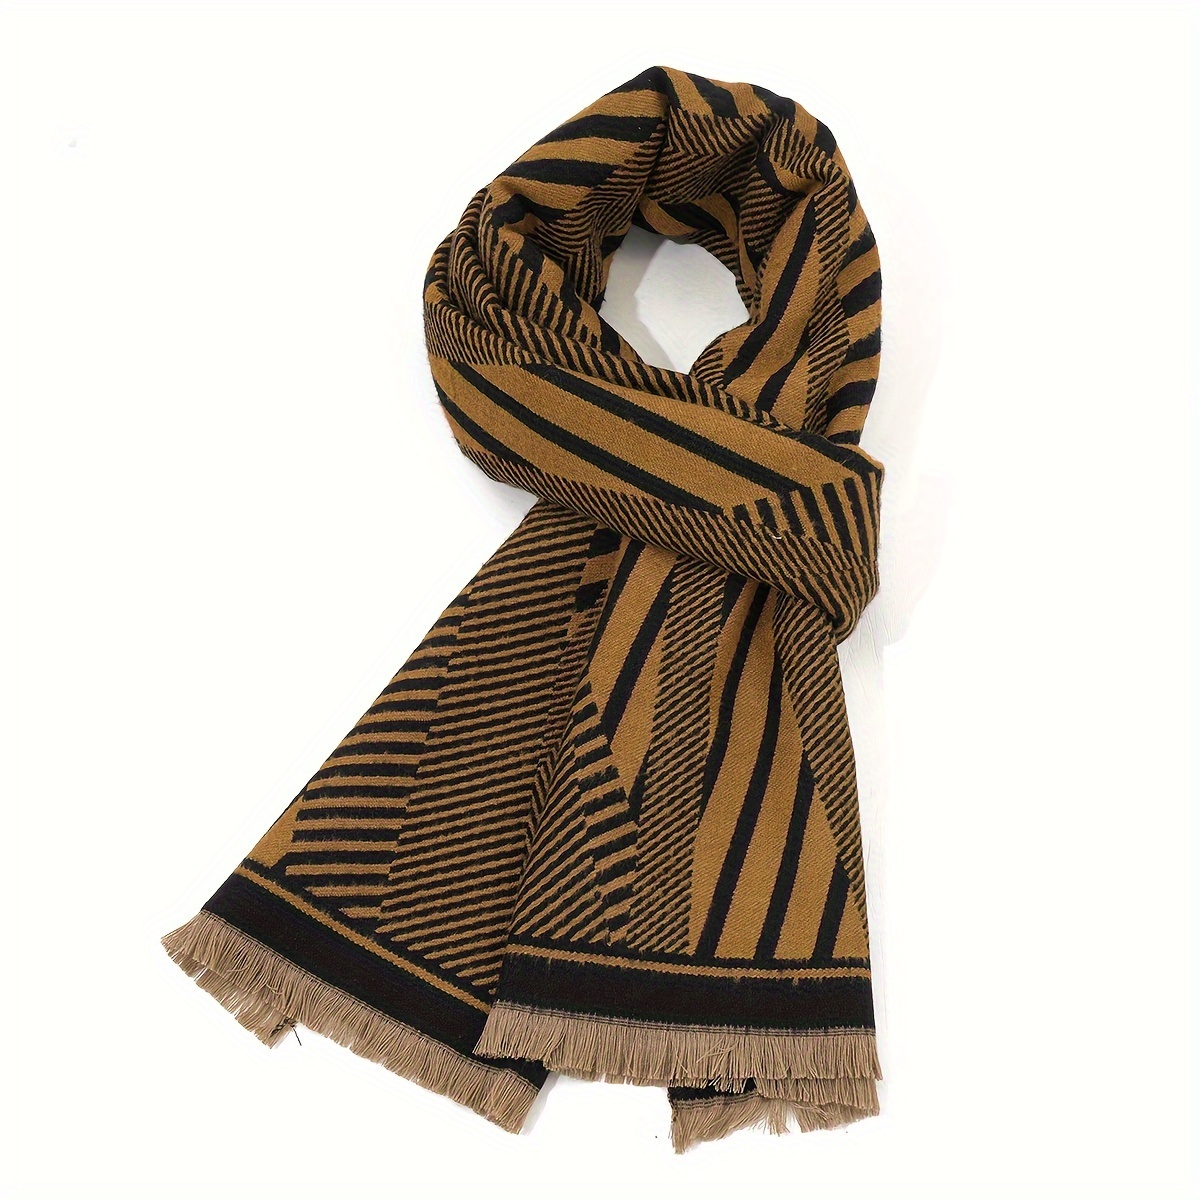 1pc Women's Faux Cashmere Jacquard Warm Scarf Shawl, Suitable For Daily  Wear In Autumn And Winter